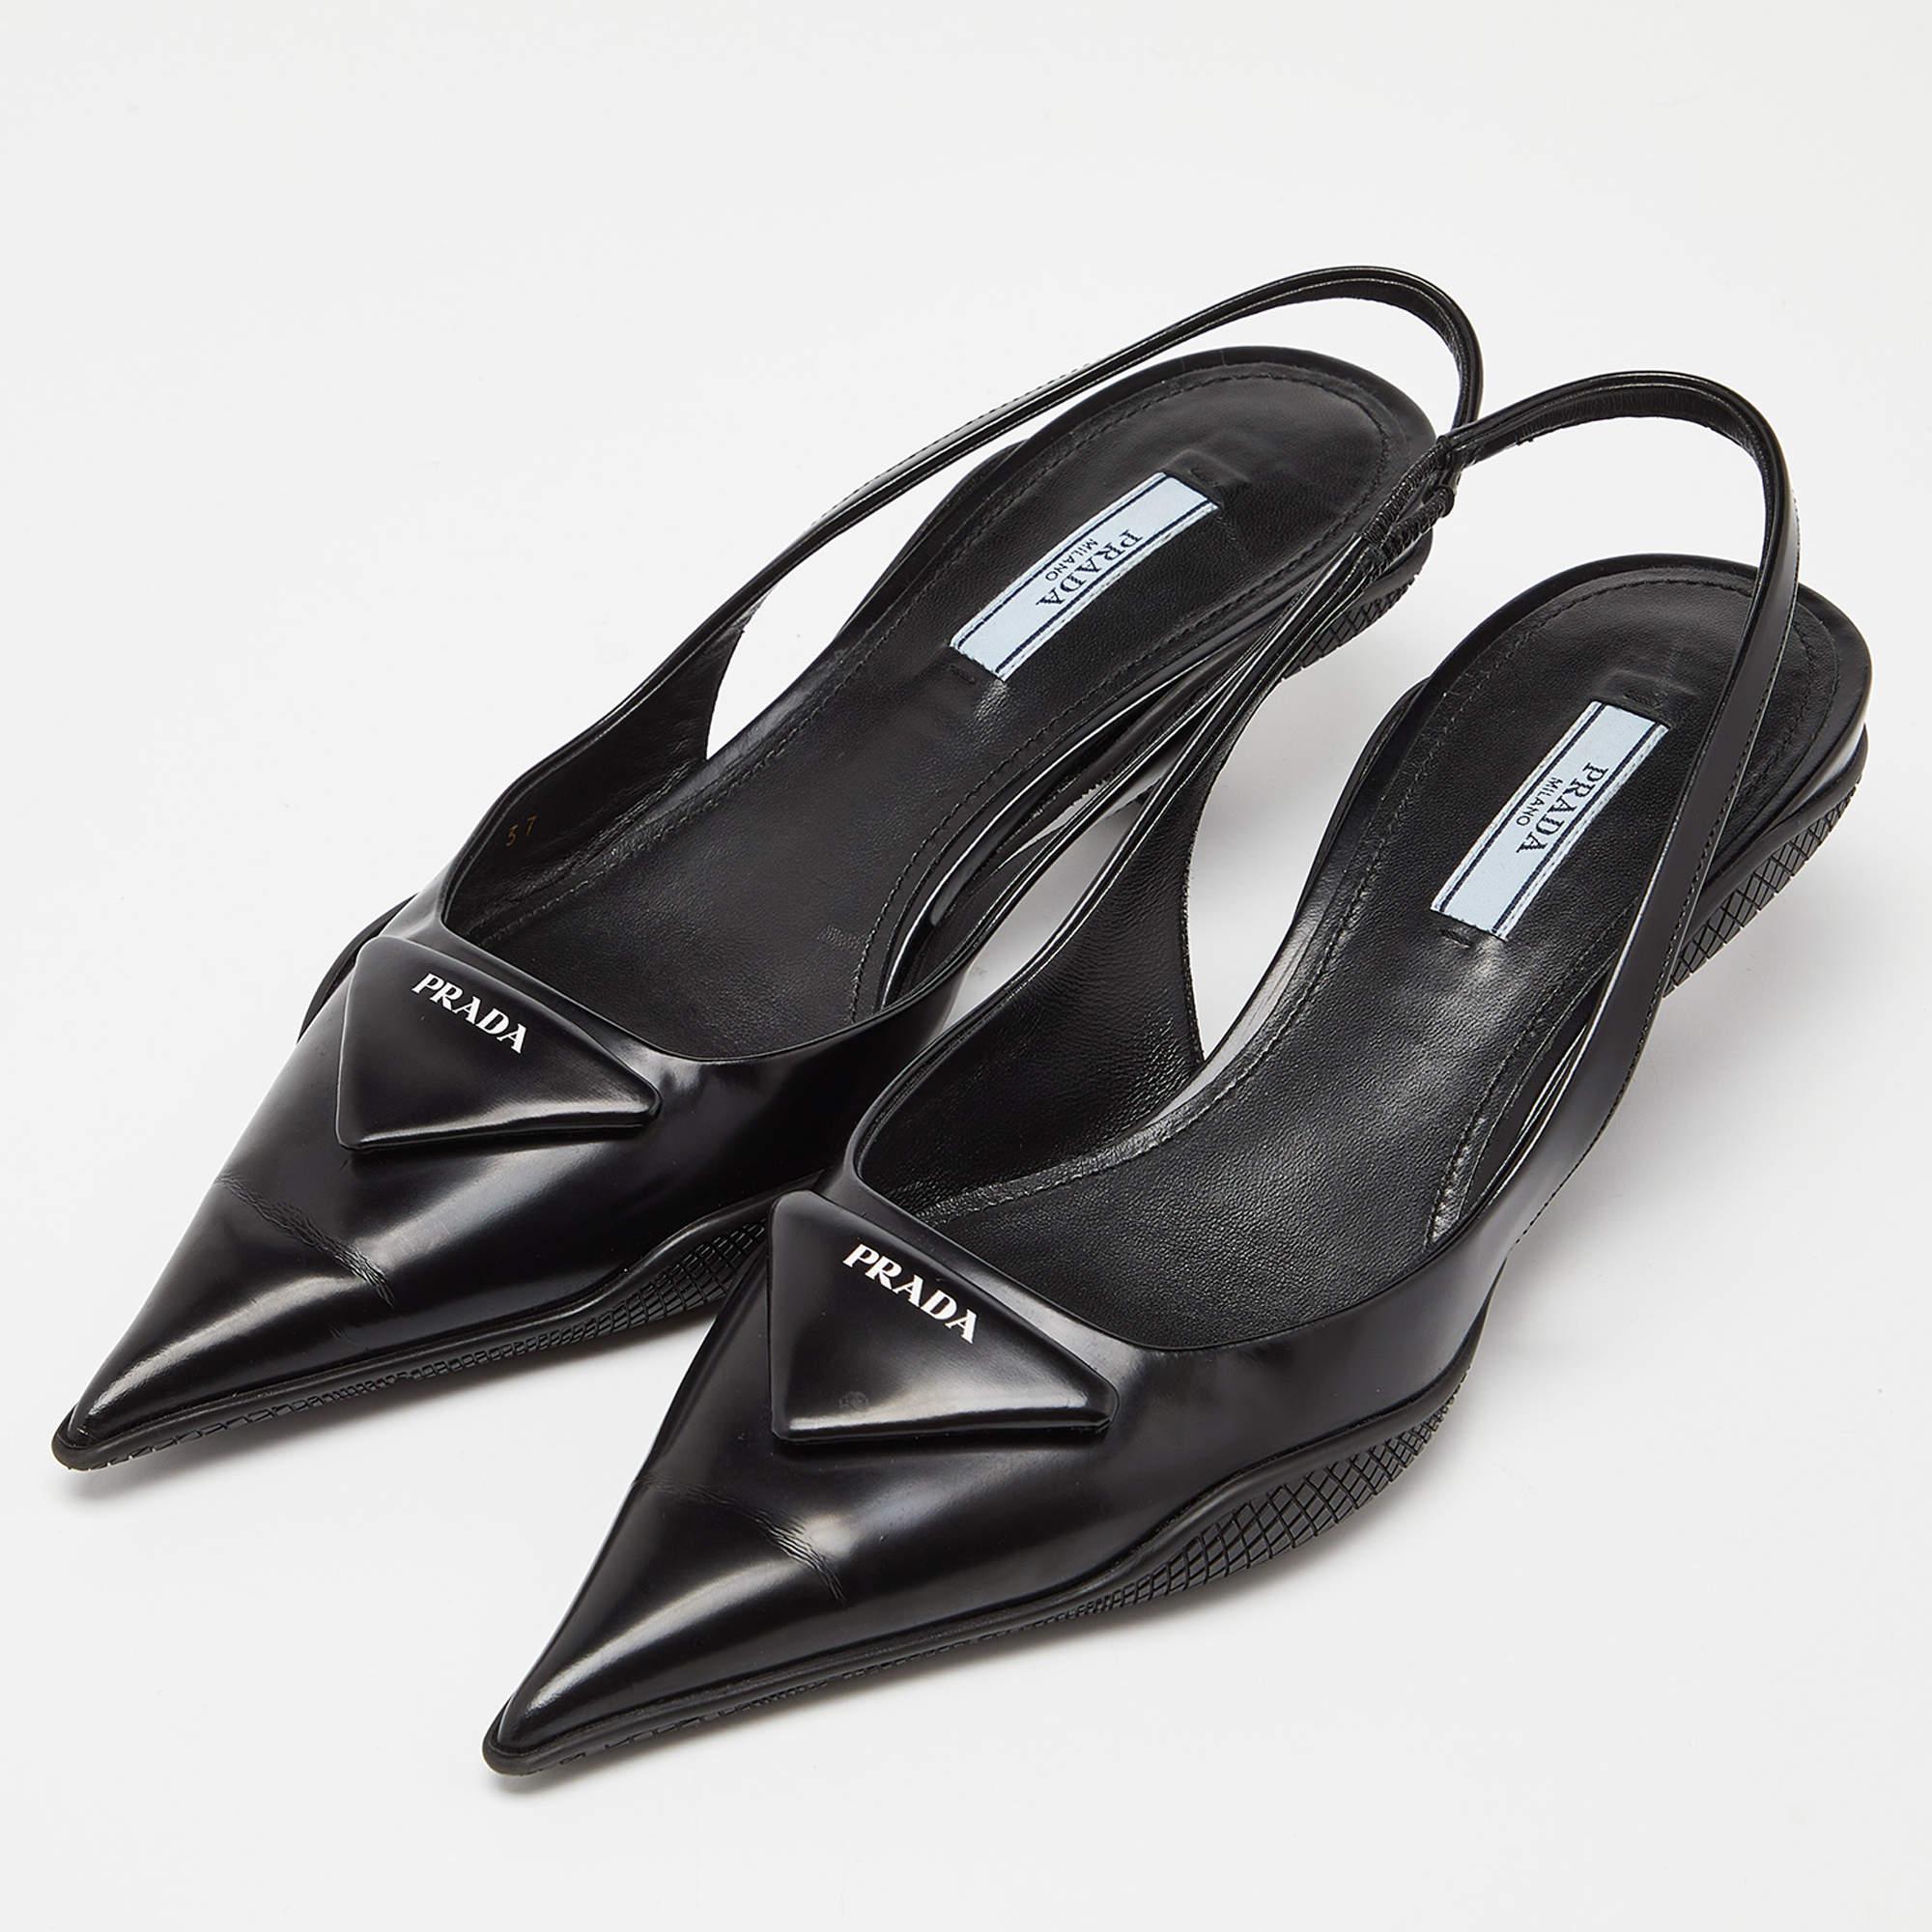 A simple pointed-toe slingback sandal elevated by a logo detail on the uppers brings out the modern charm of this Prada design. The sandals are made of black leather and carefully fashioned to ensure every step you take is comfortable and